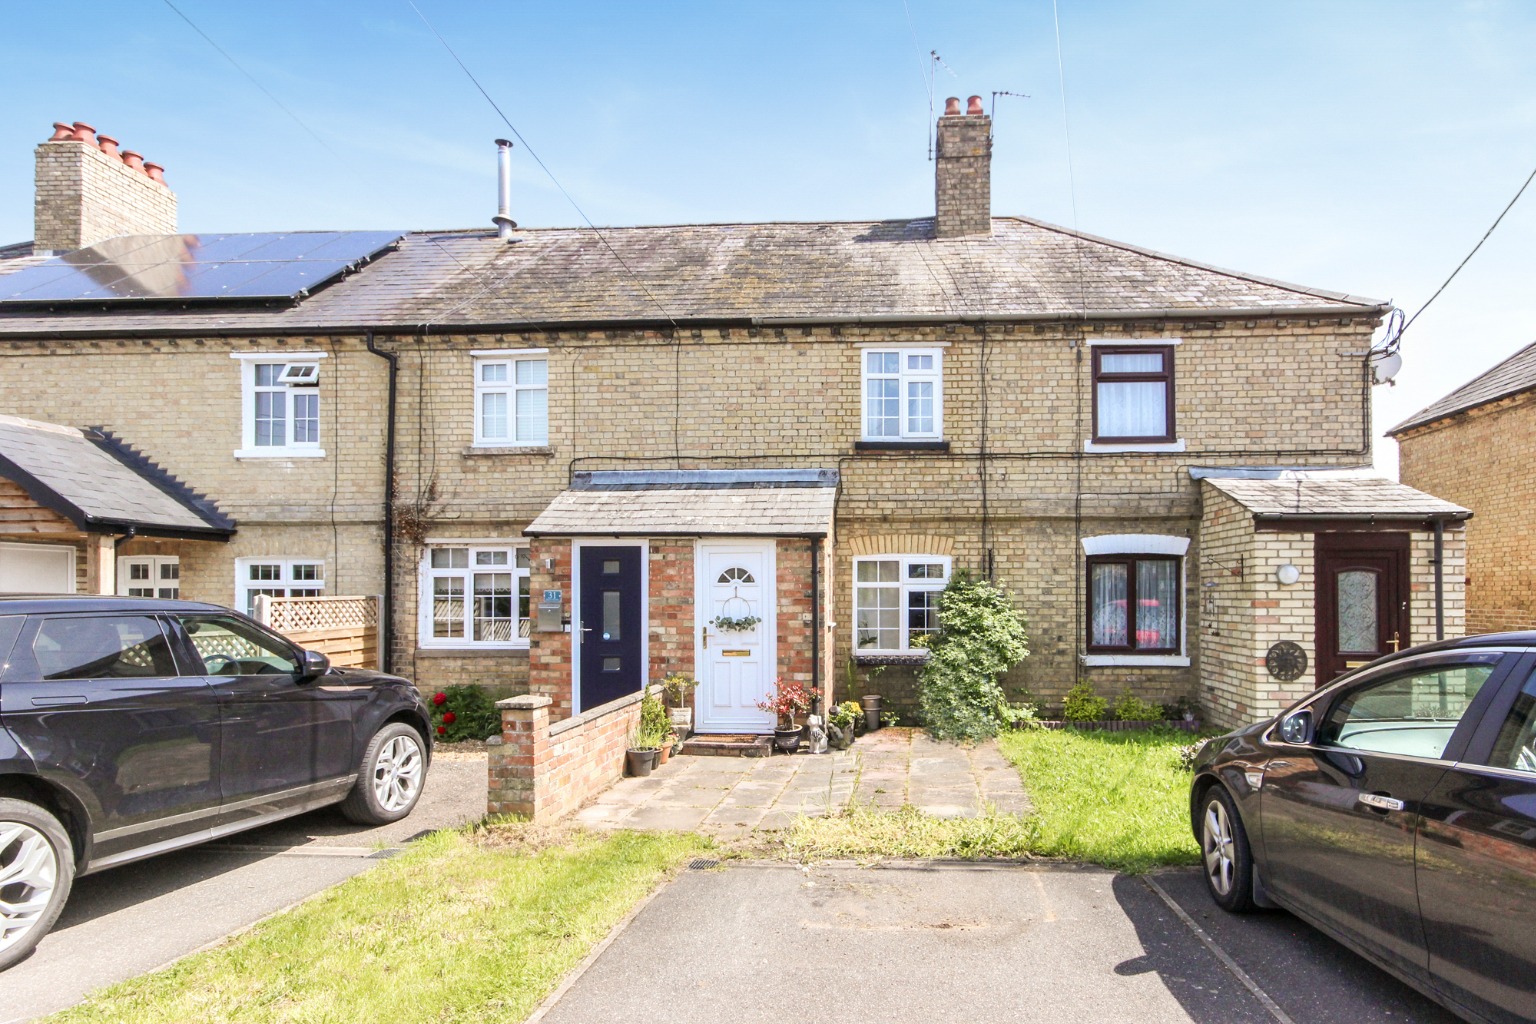 2 bed terraced house for sale in Breach Road, Huntingdon - Property Image 1